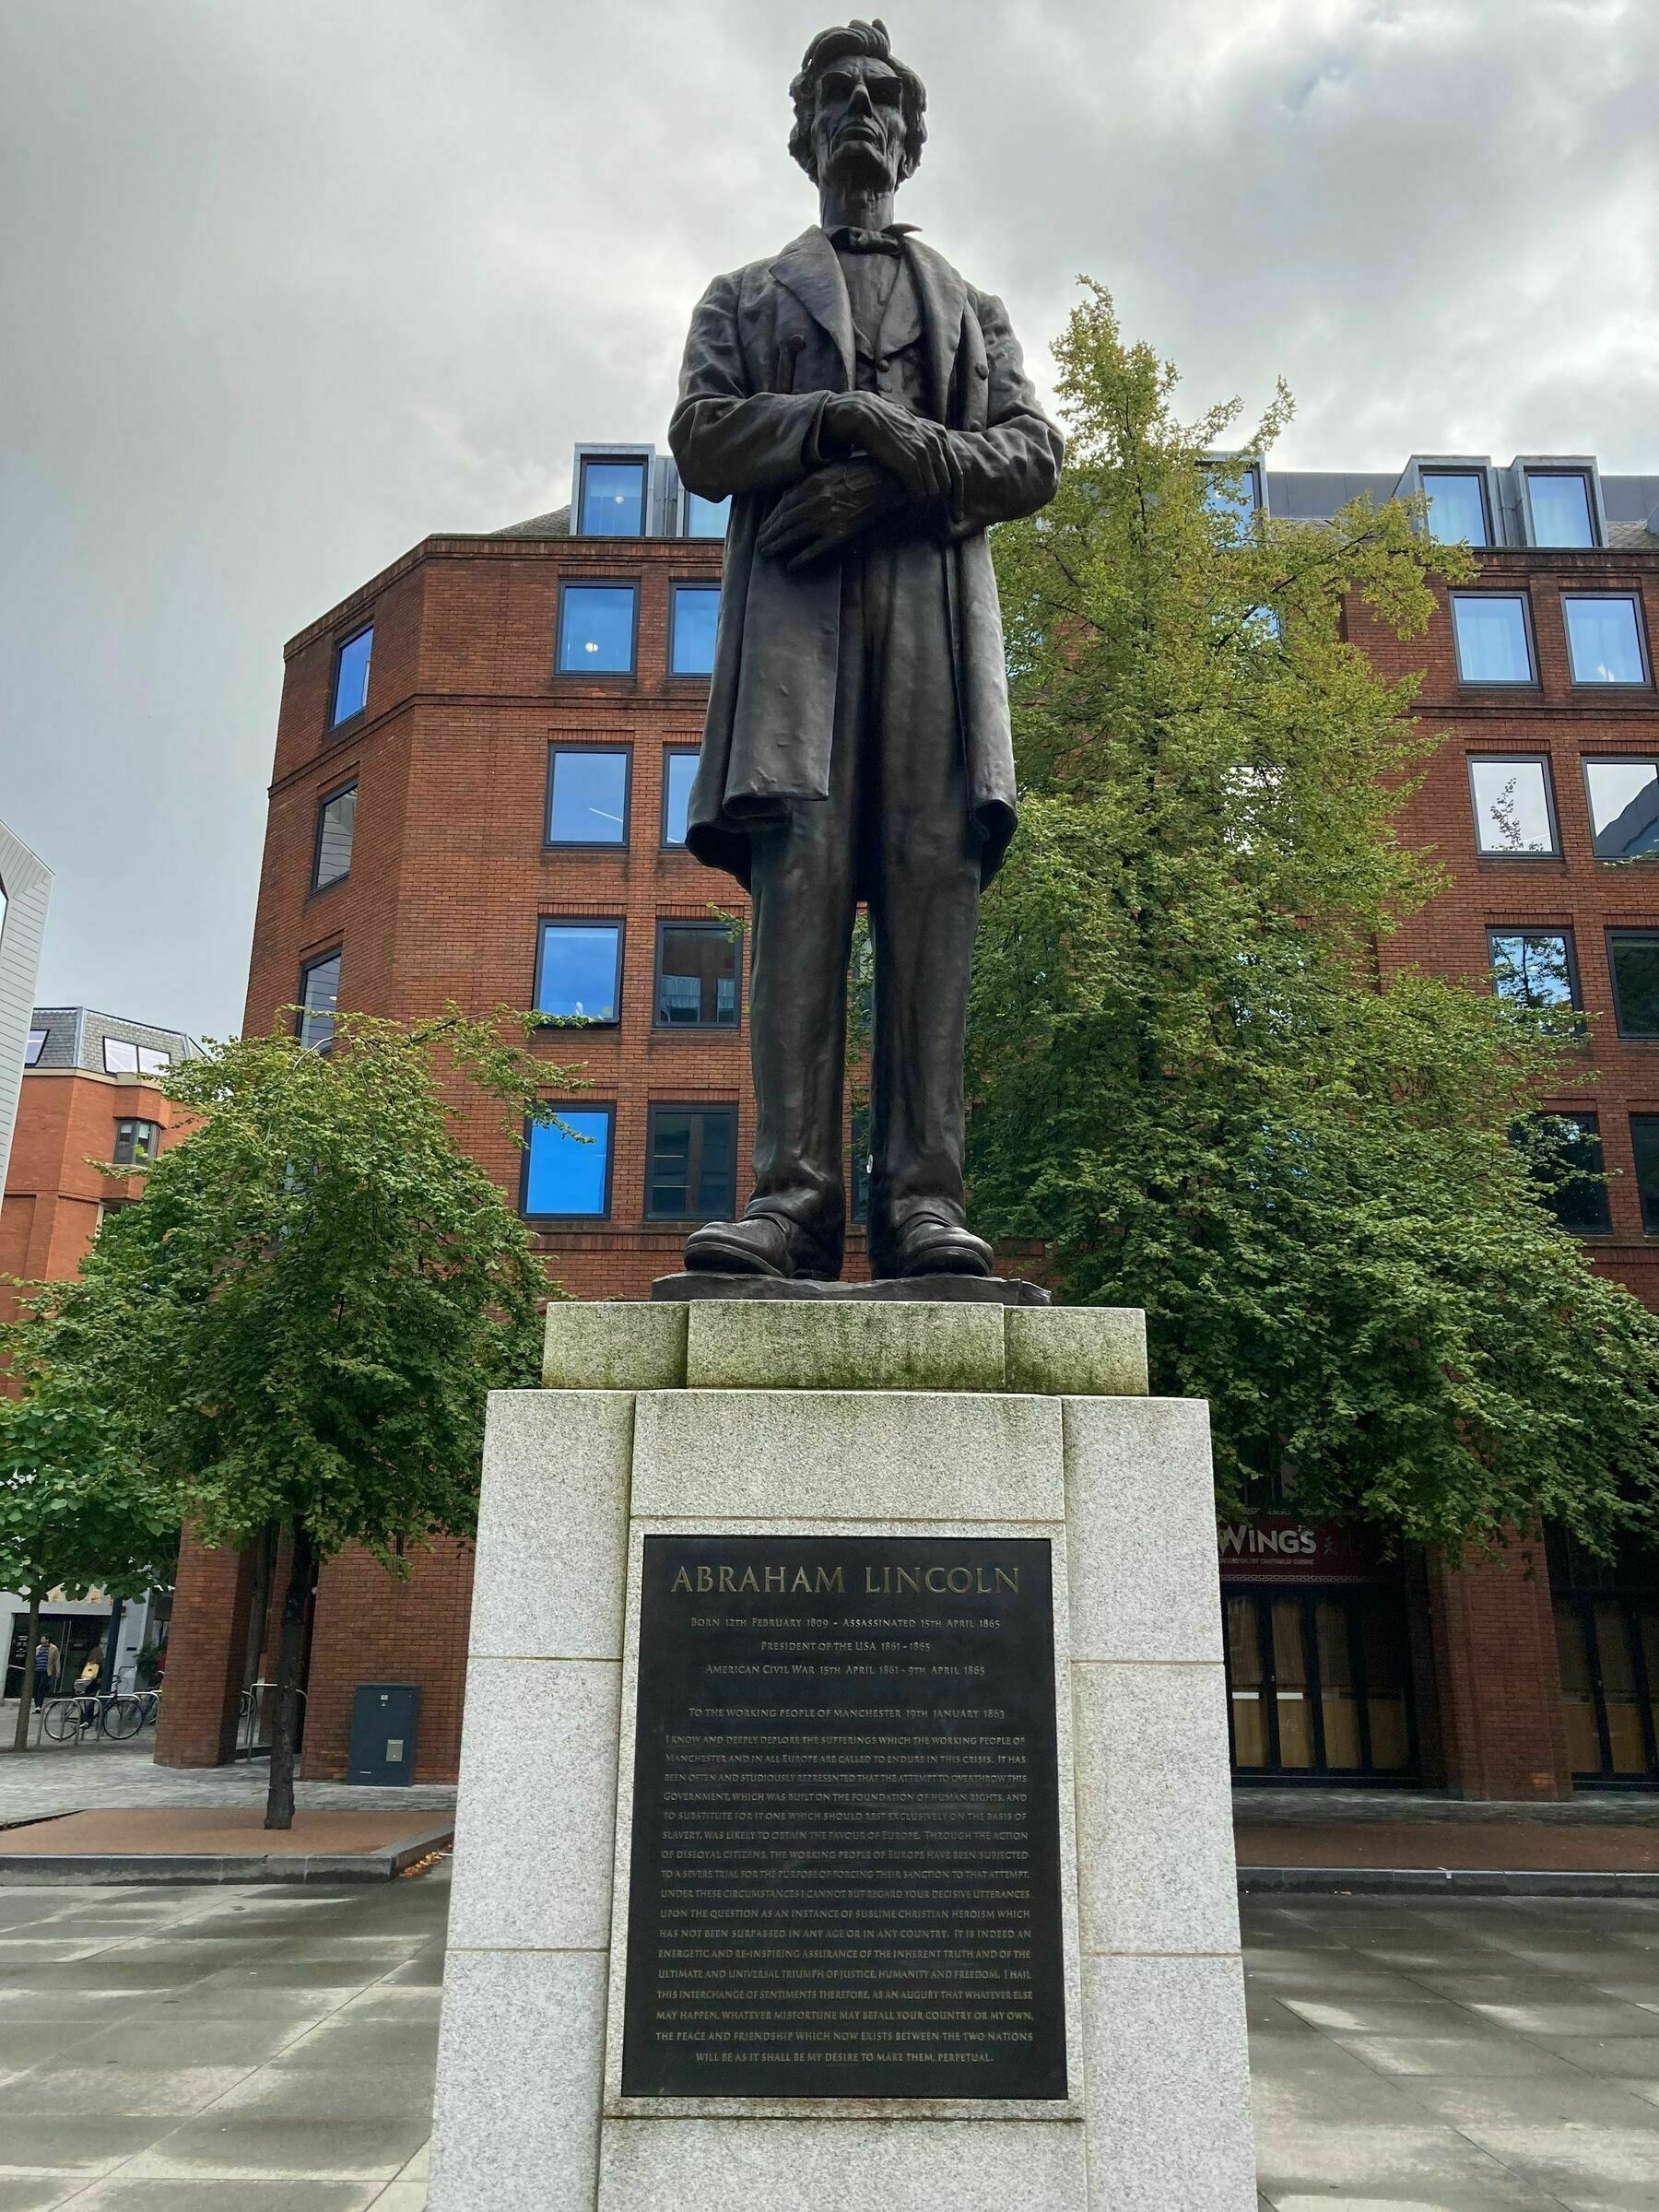 Statue of Abraham Lincoln in Manchester UK